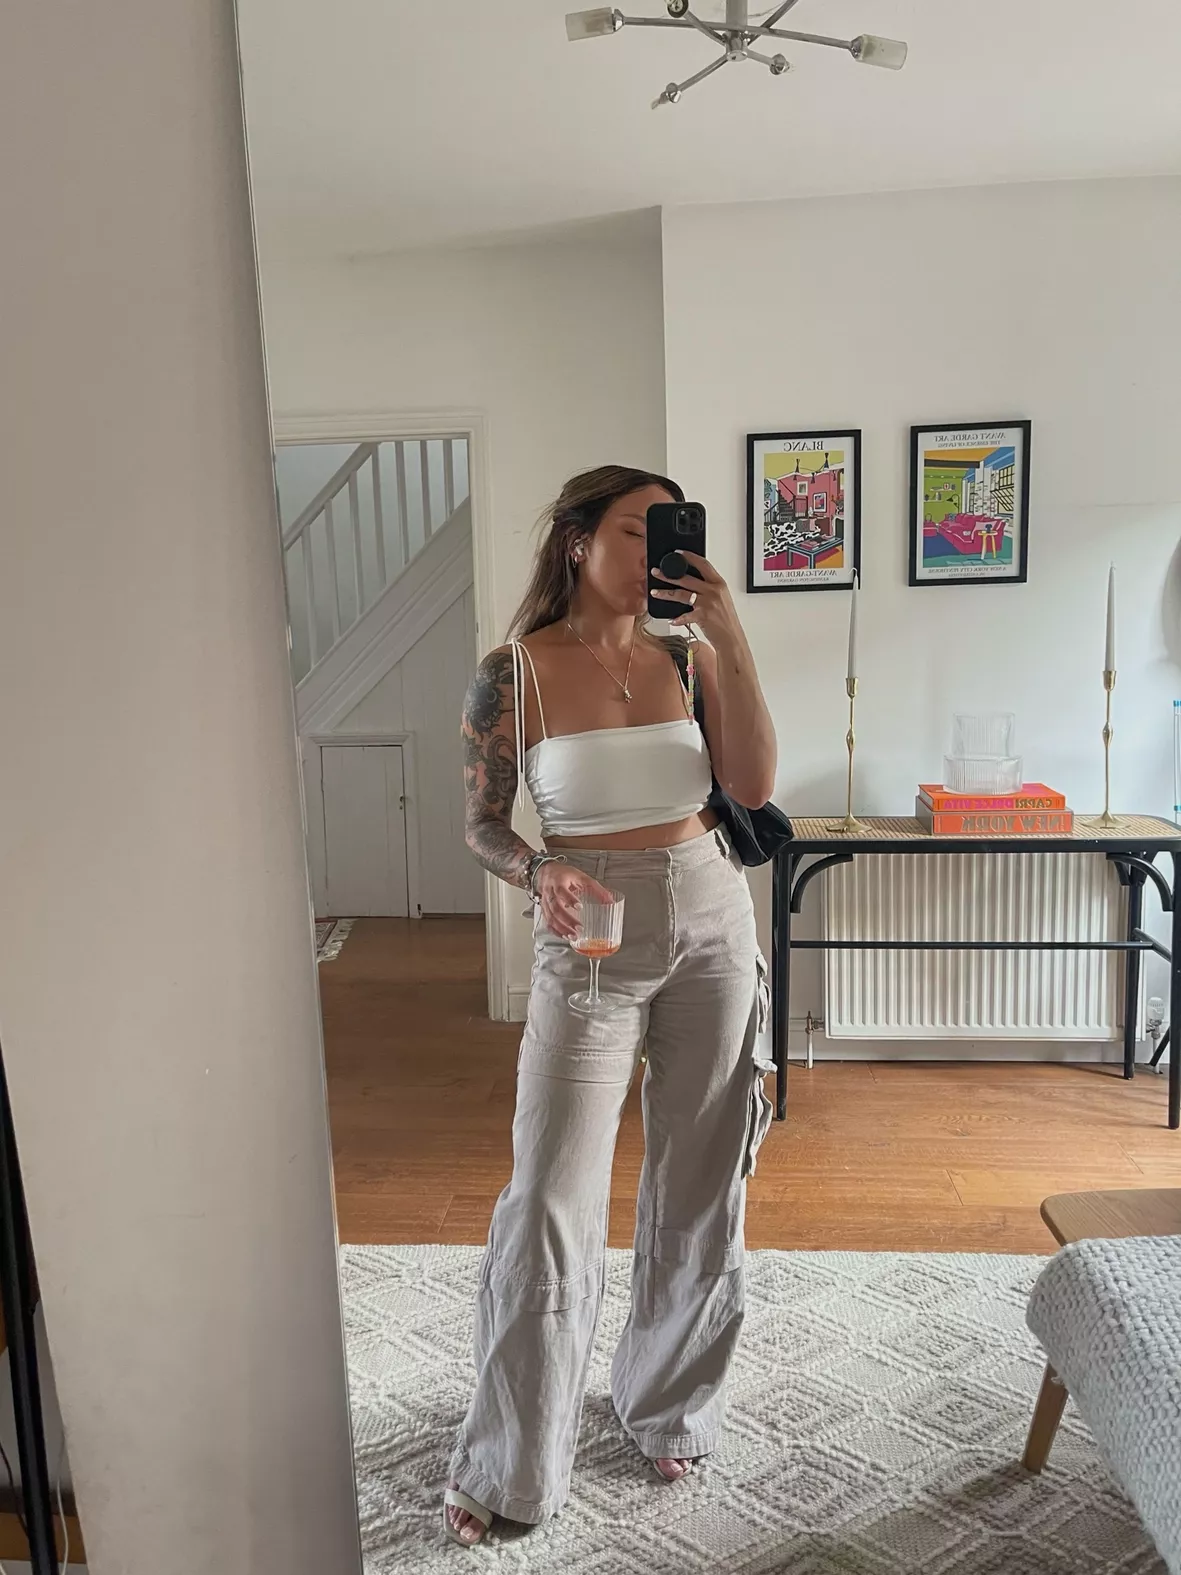 Work Outfit Idea: Bright Cami, Cropped White Pants, and Strappy